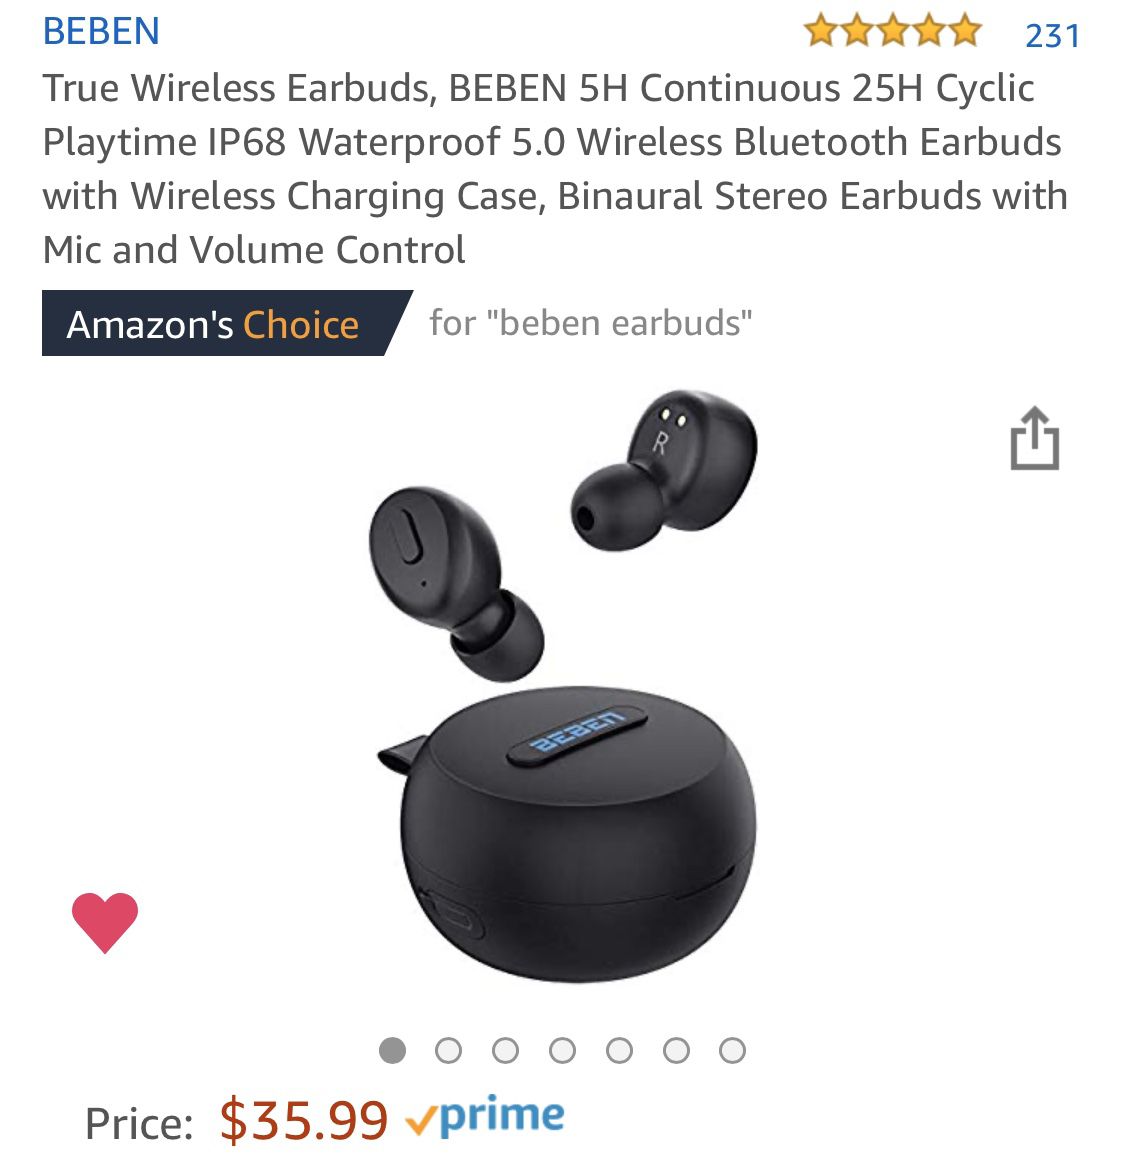 True Wireless Earbuds, BEBEN 5H Continuous 25H Cyclic Playtime IP68 Waterproof 5.0 Wireless Bluetooth Earbuds with Wireless Charging Case, Binaural S